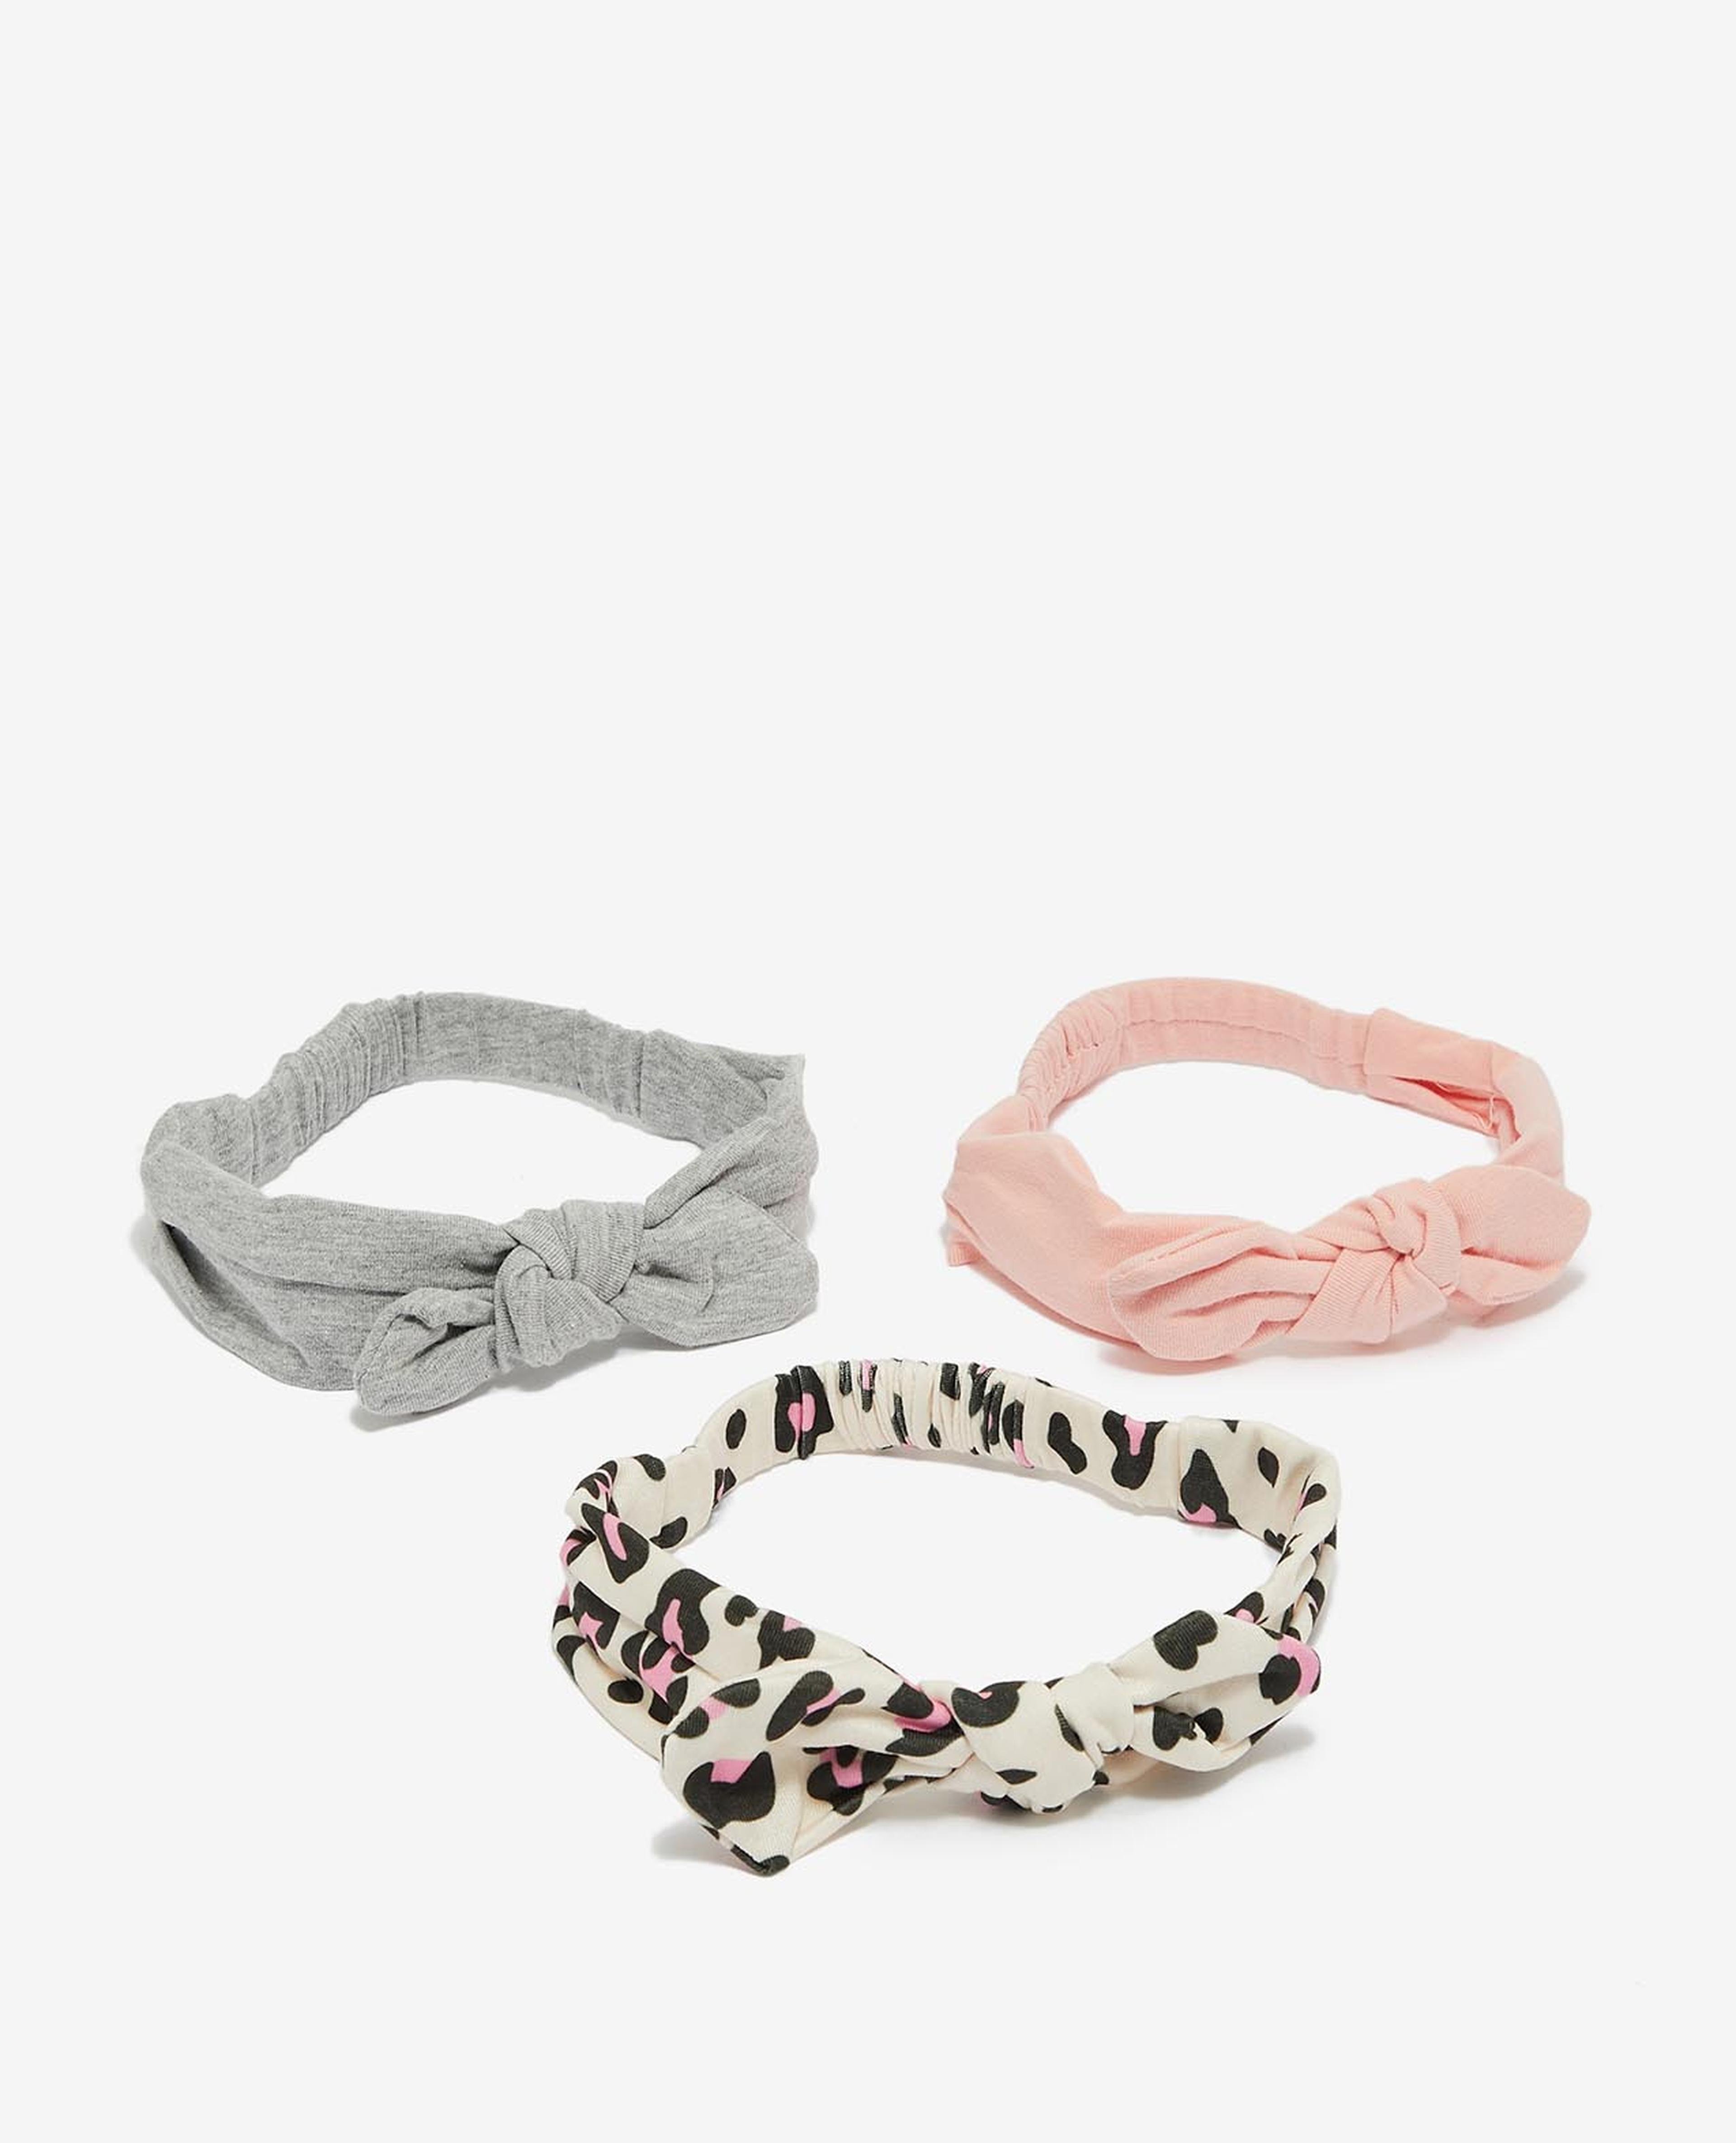 Multi-Colored Girl's Knotted Headband 3Pcs